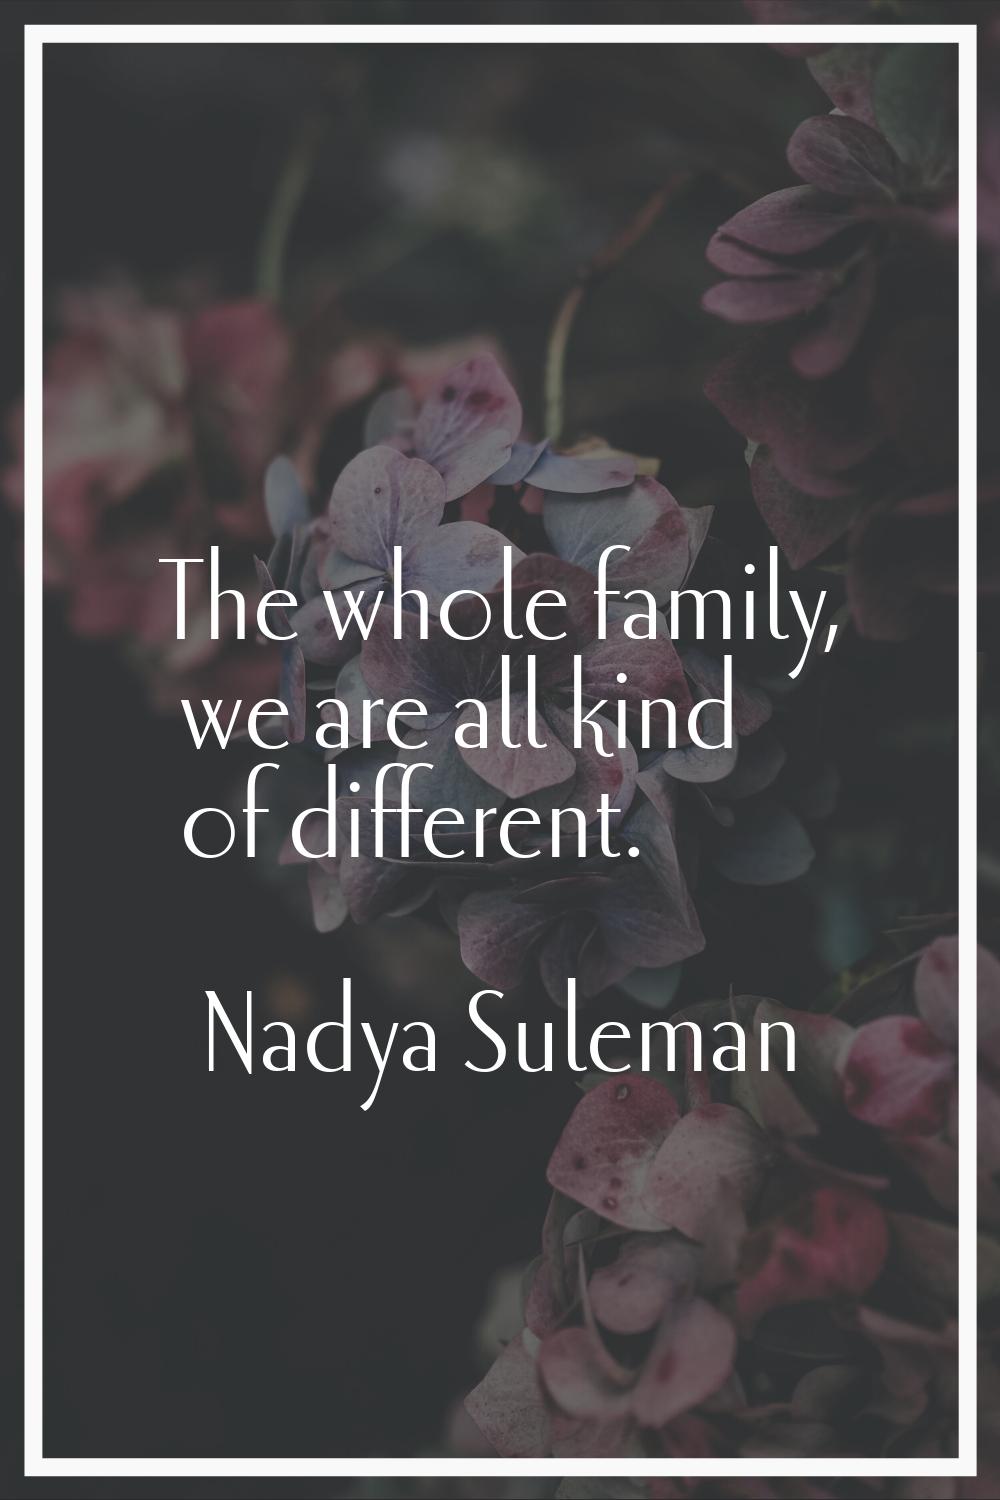 The whole family, we are all kind of different.